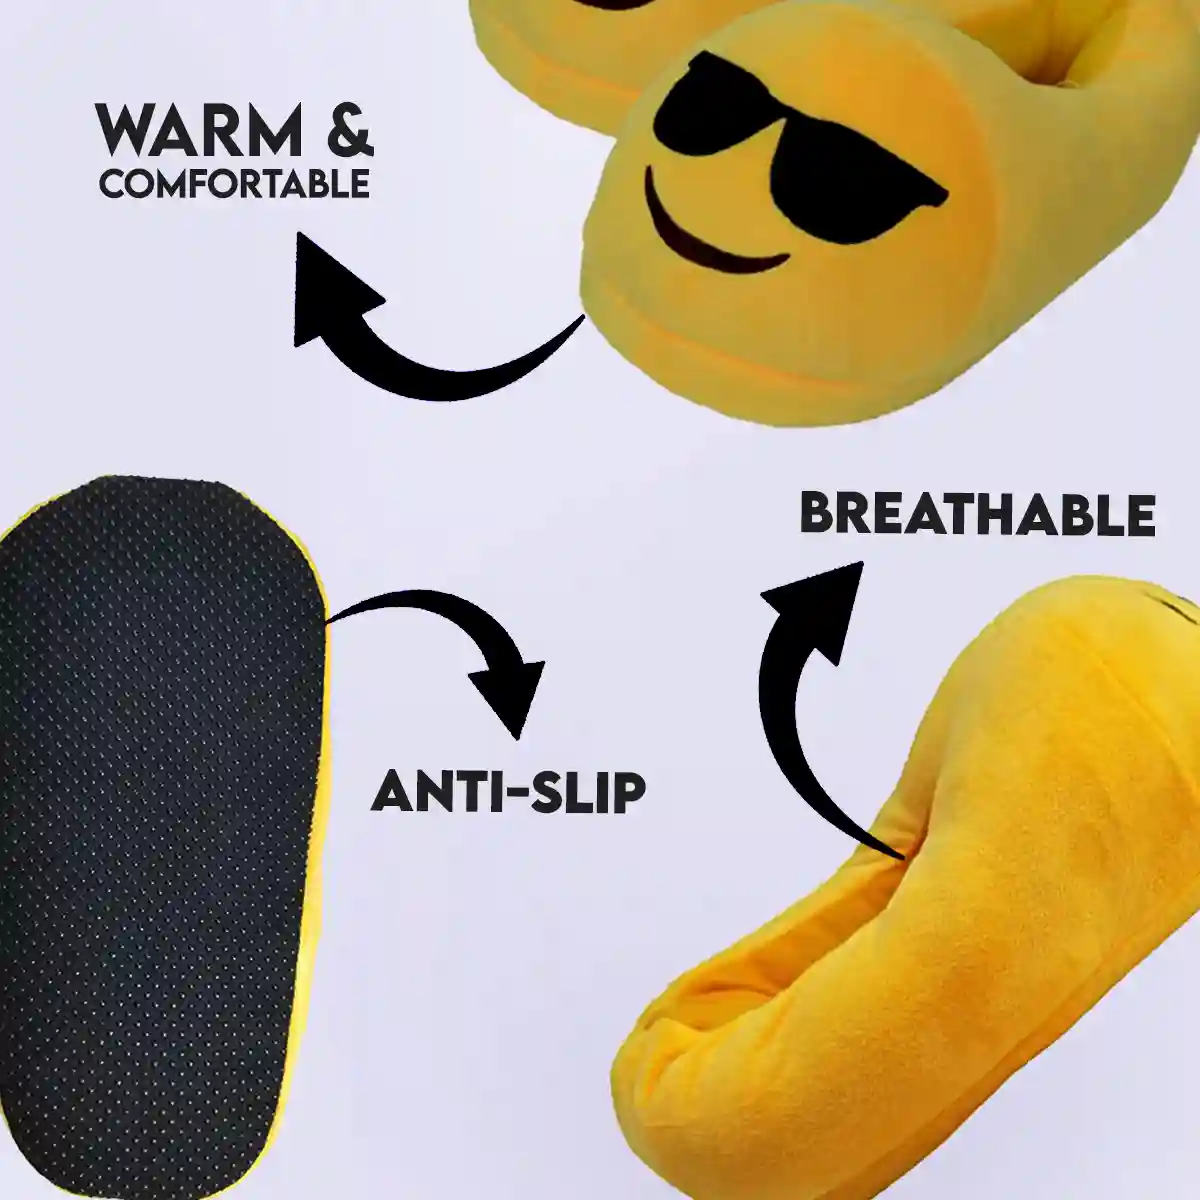 Buy Emoji Slippers Soft and comfortable Slippers at best price in Pakistan ~ Rhizmall.pk